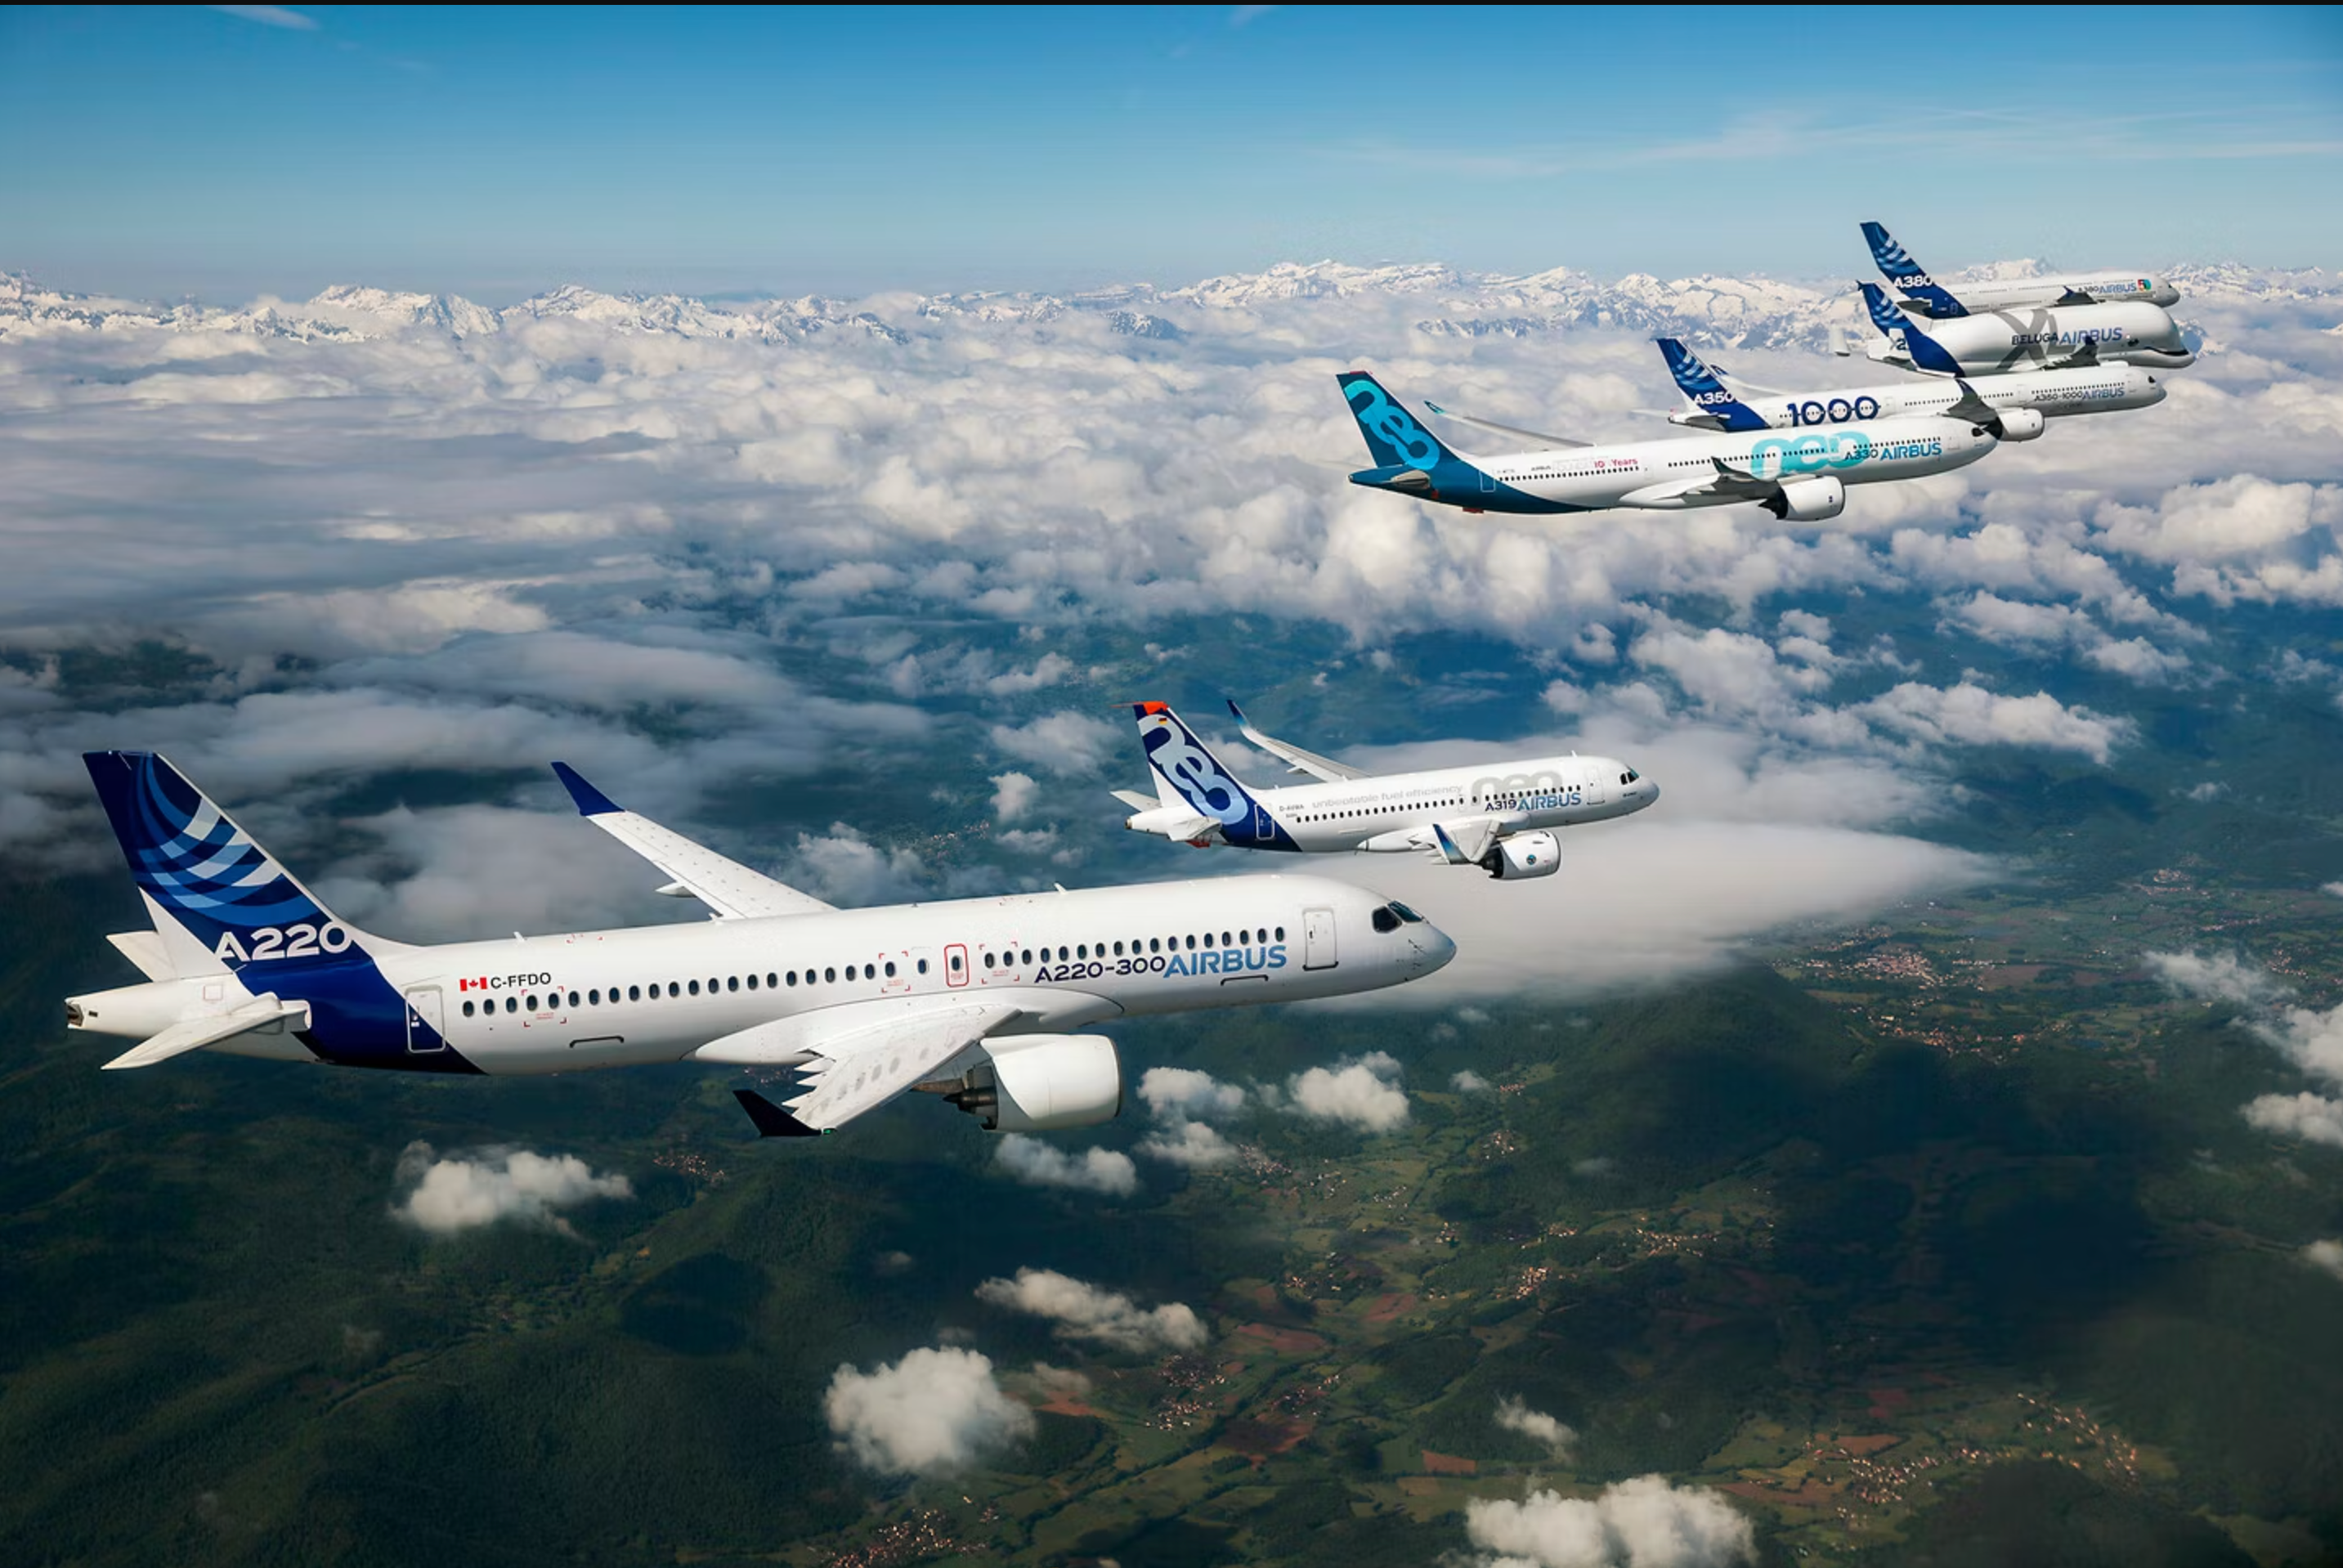 A render of several different Airbus aircraft types flying side by side.